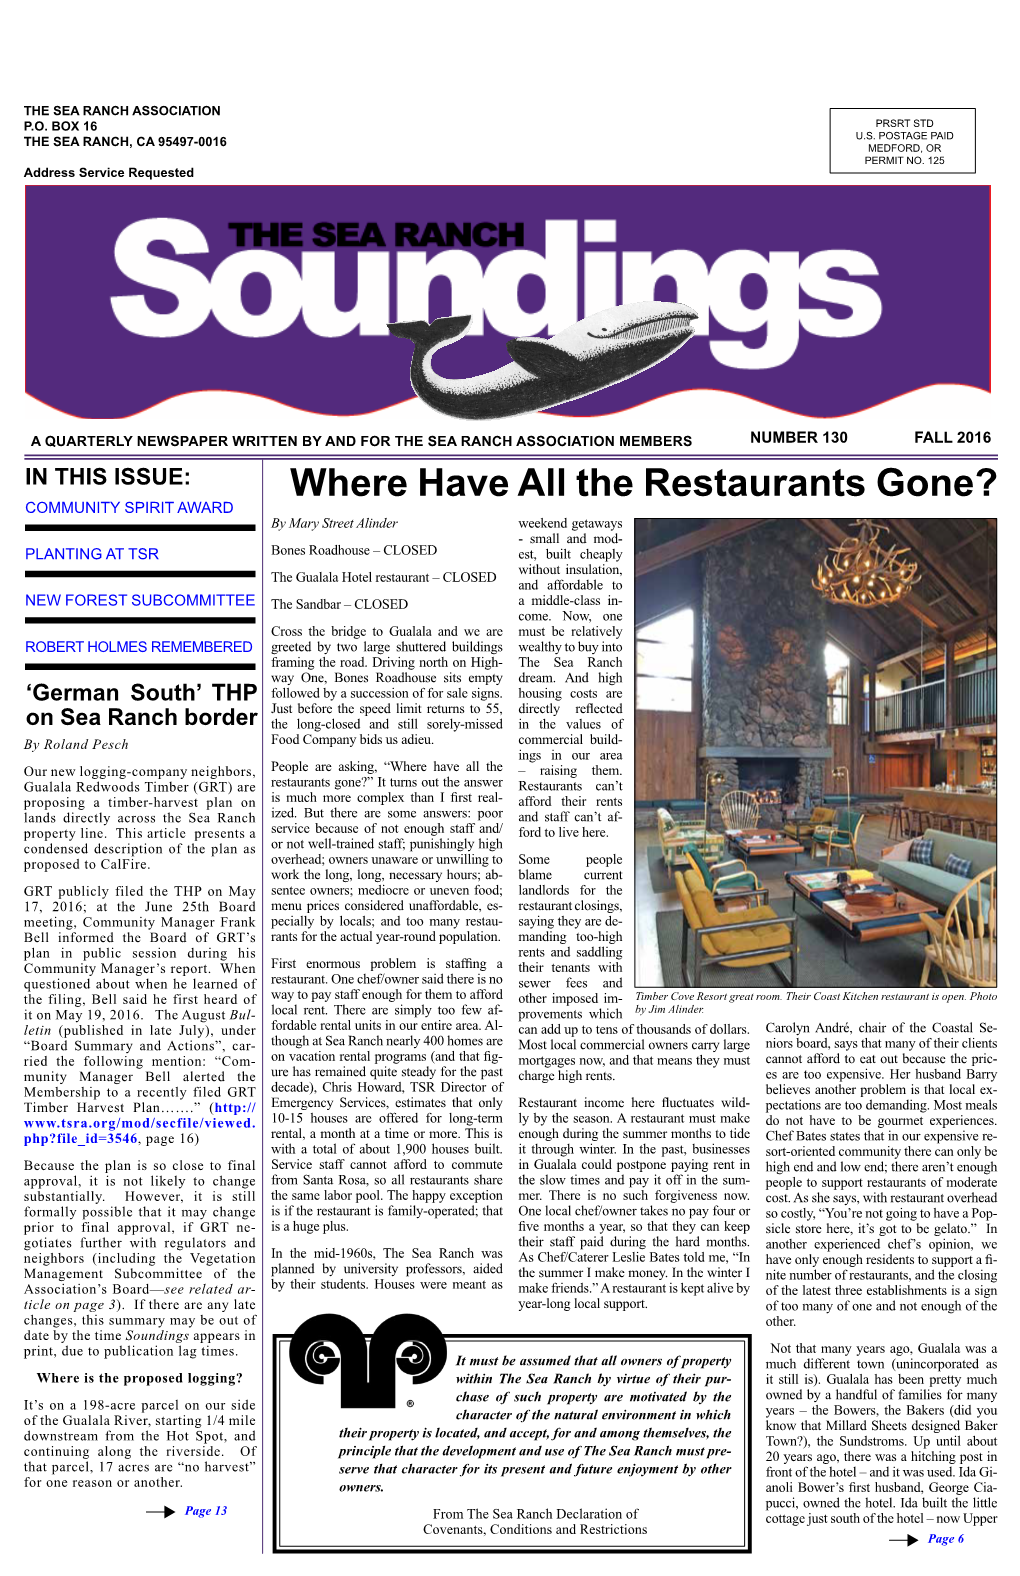 Soundings Appears in Print, Due to Publication Lag Times